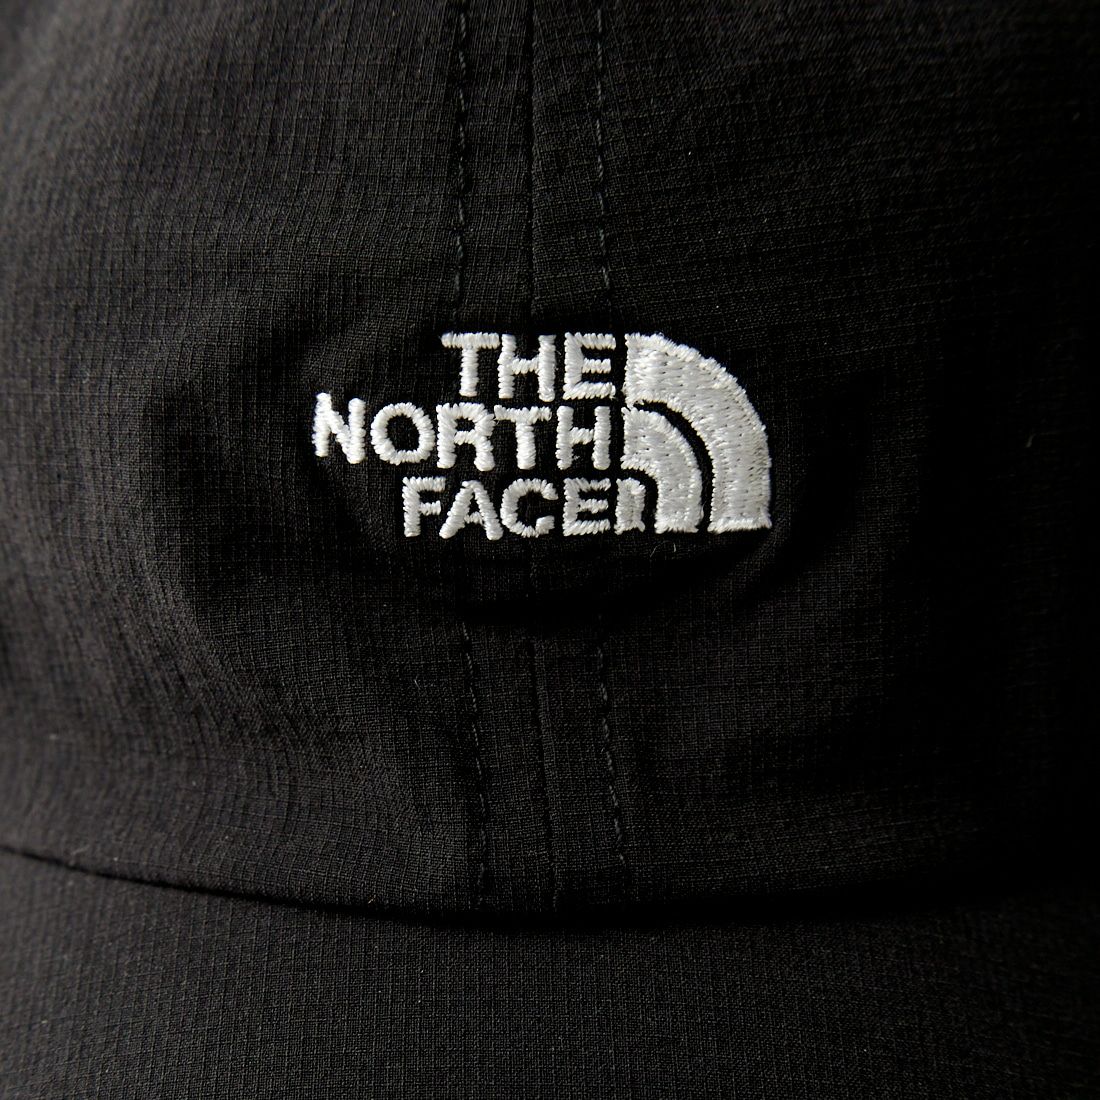 THE NORTH FACE [ザ ノースフェイス] アクティブ ライトキャップ [NN02378]｜ジーンズファクトリー公式通販サイト -  JEANS FACTORY Online Shop